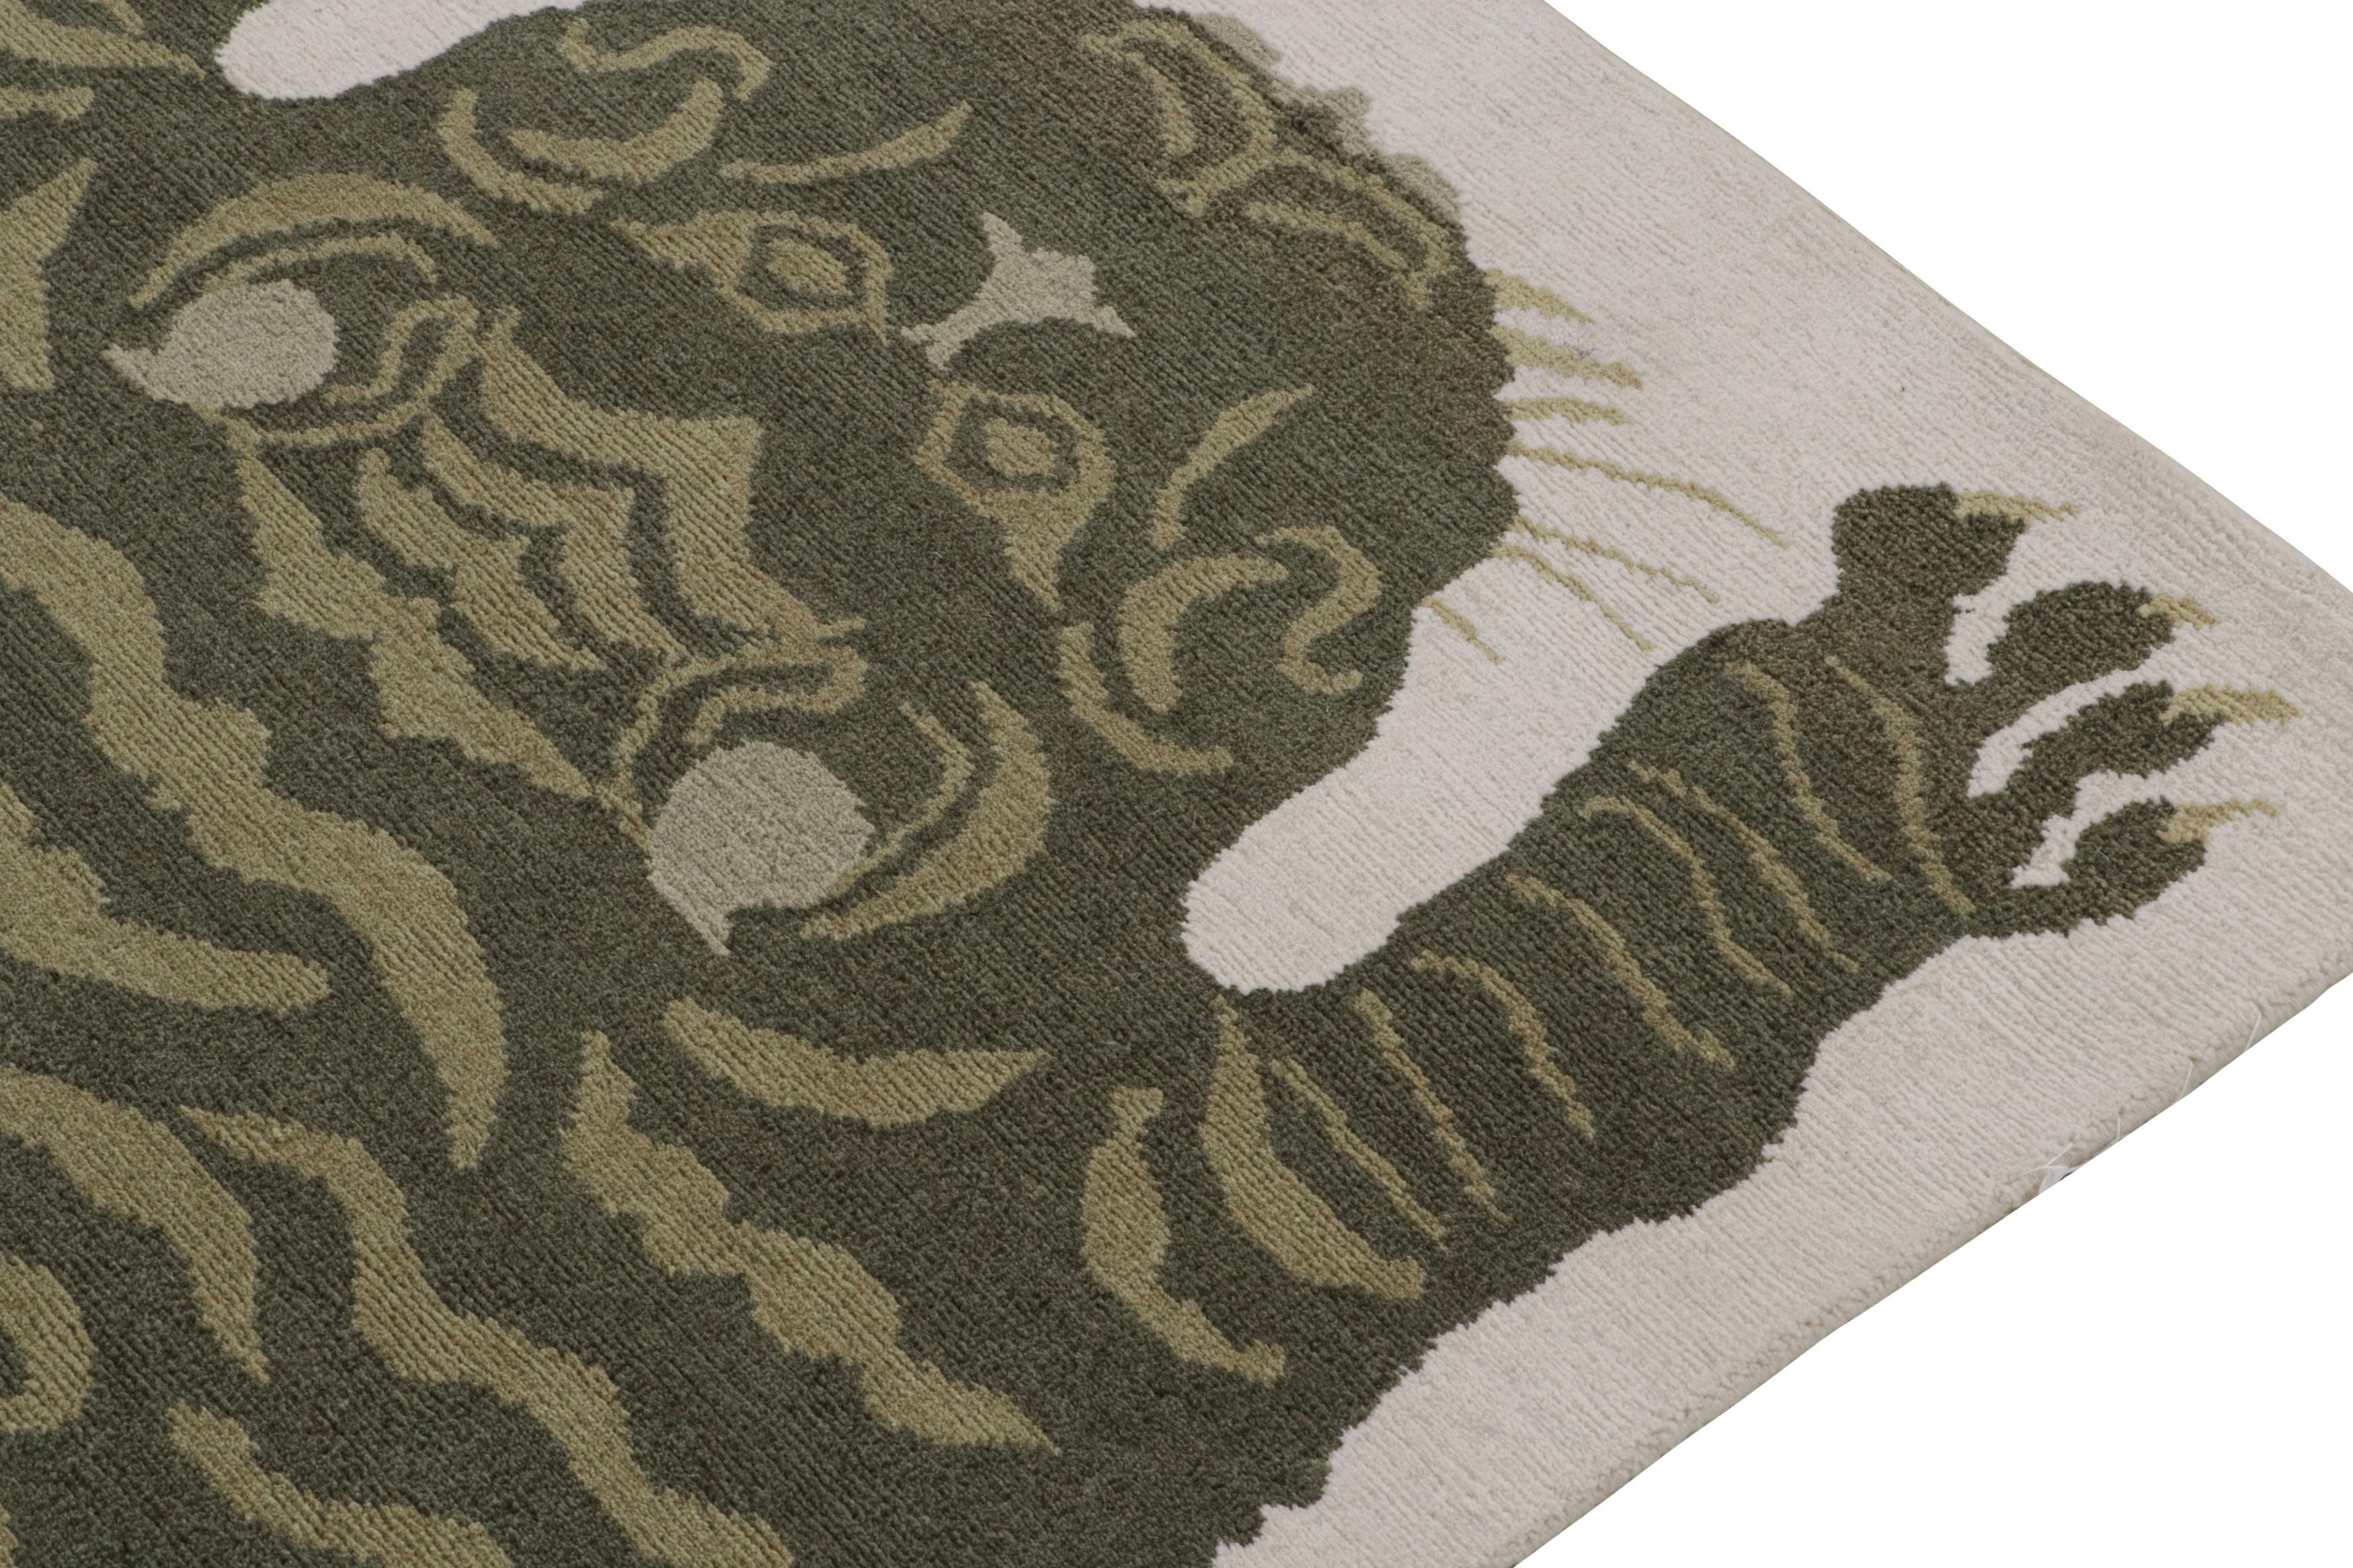 Rug & Kilim’s Tiger-Skin Rug in White with Pictorials in Tones of Green In New Condition For Sale In Long Island City, NY